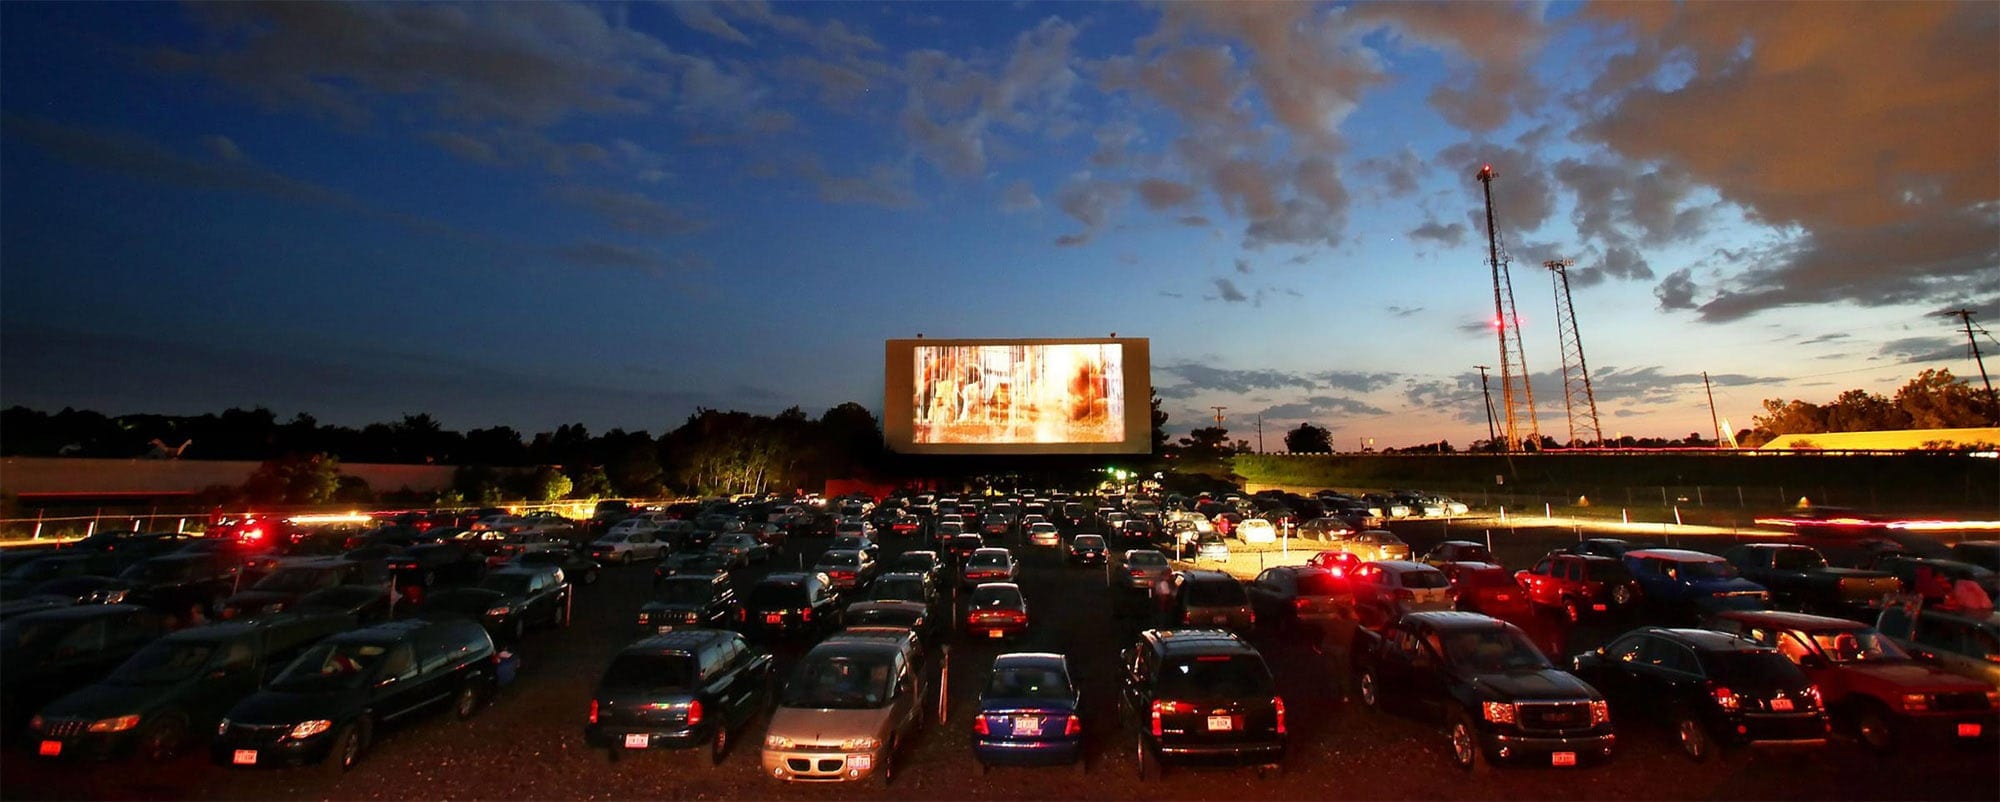 drive in theaters near me